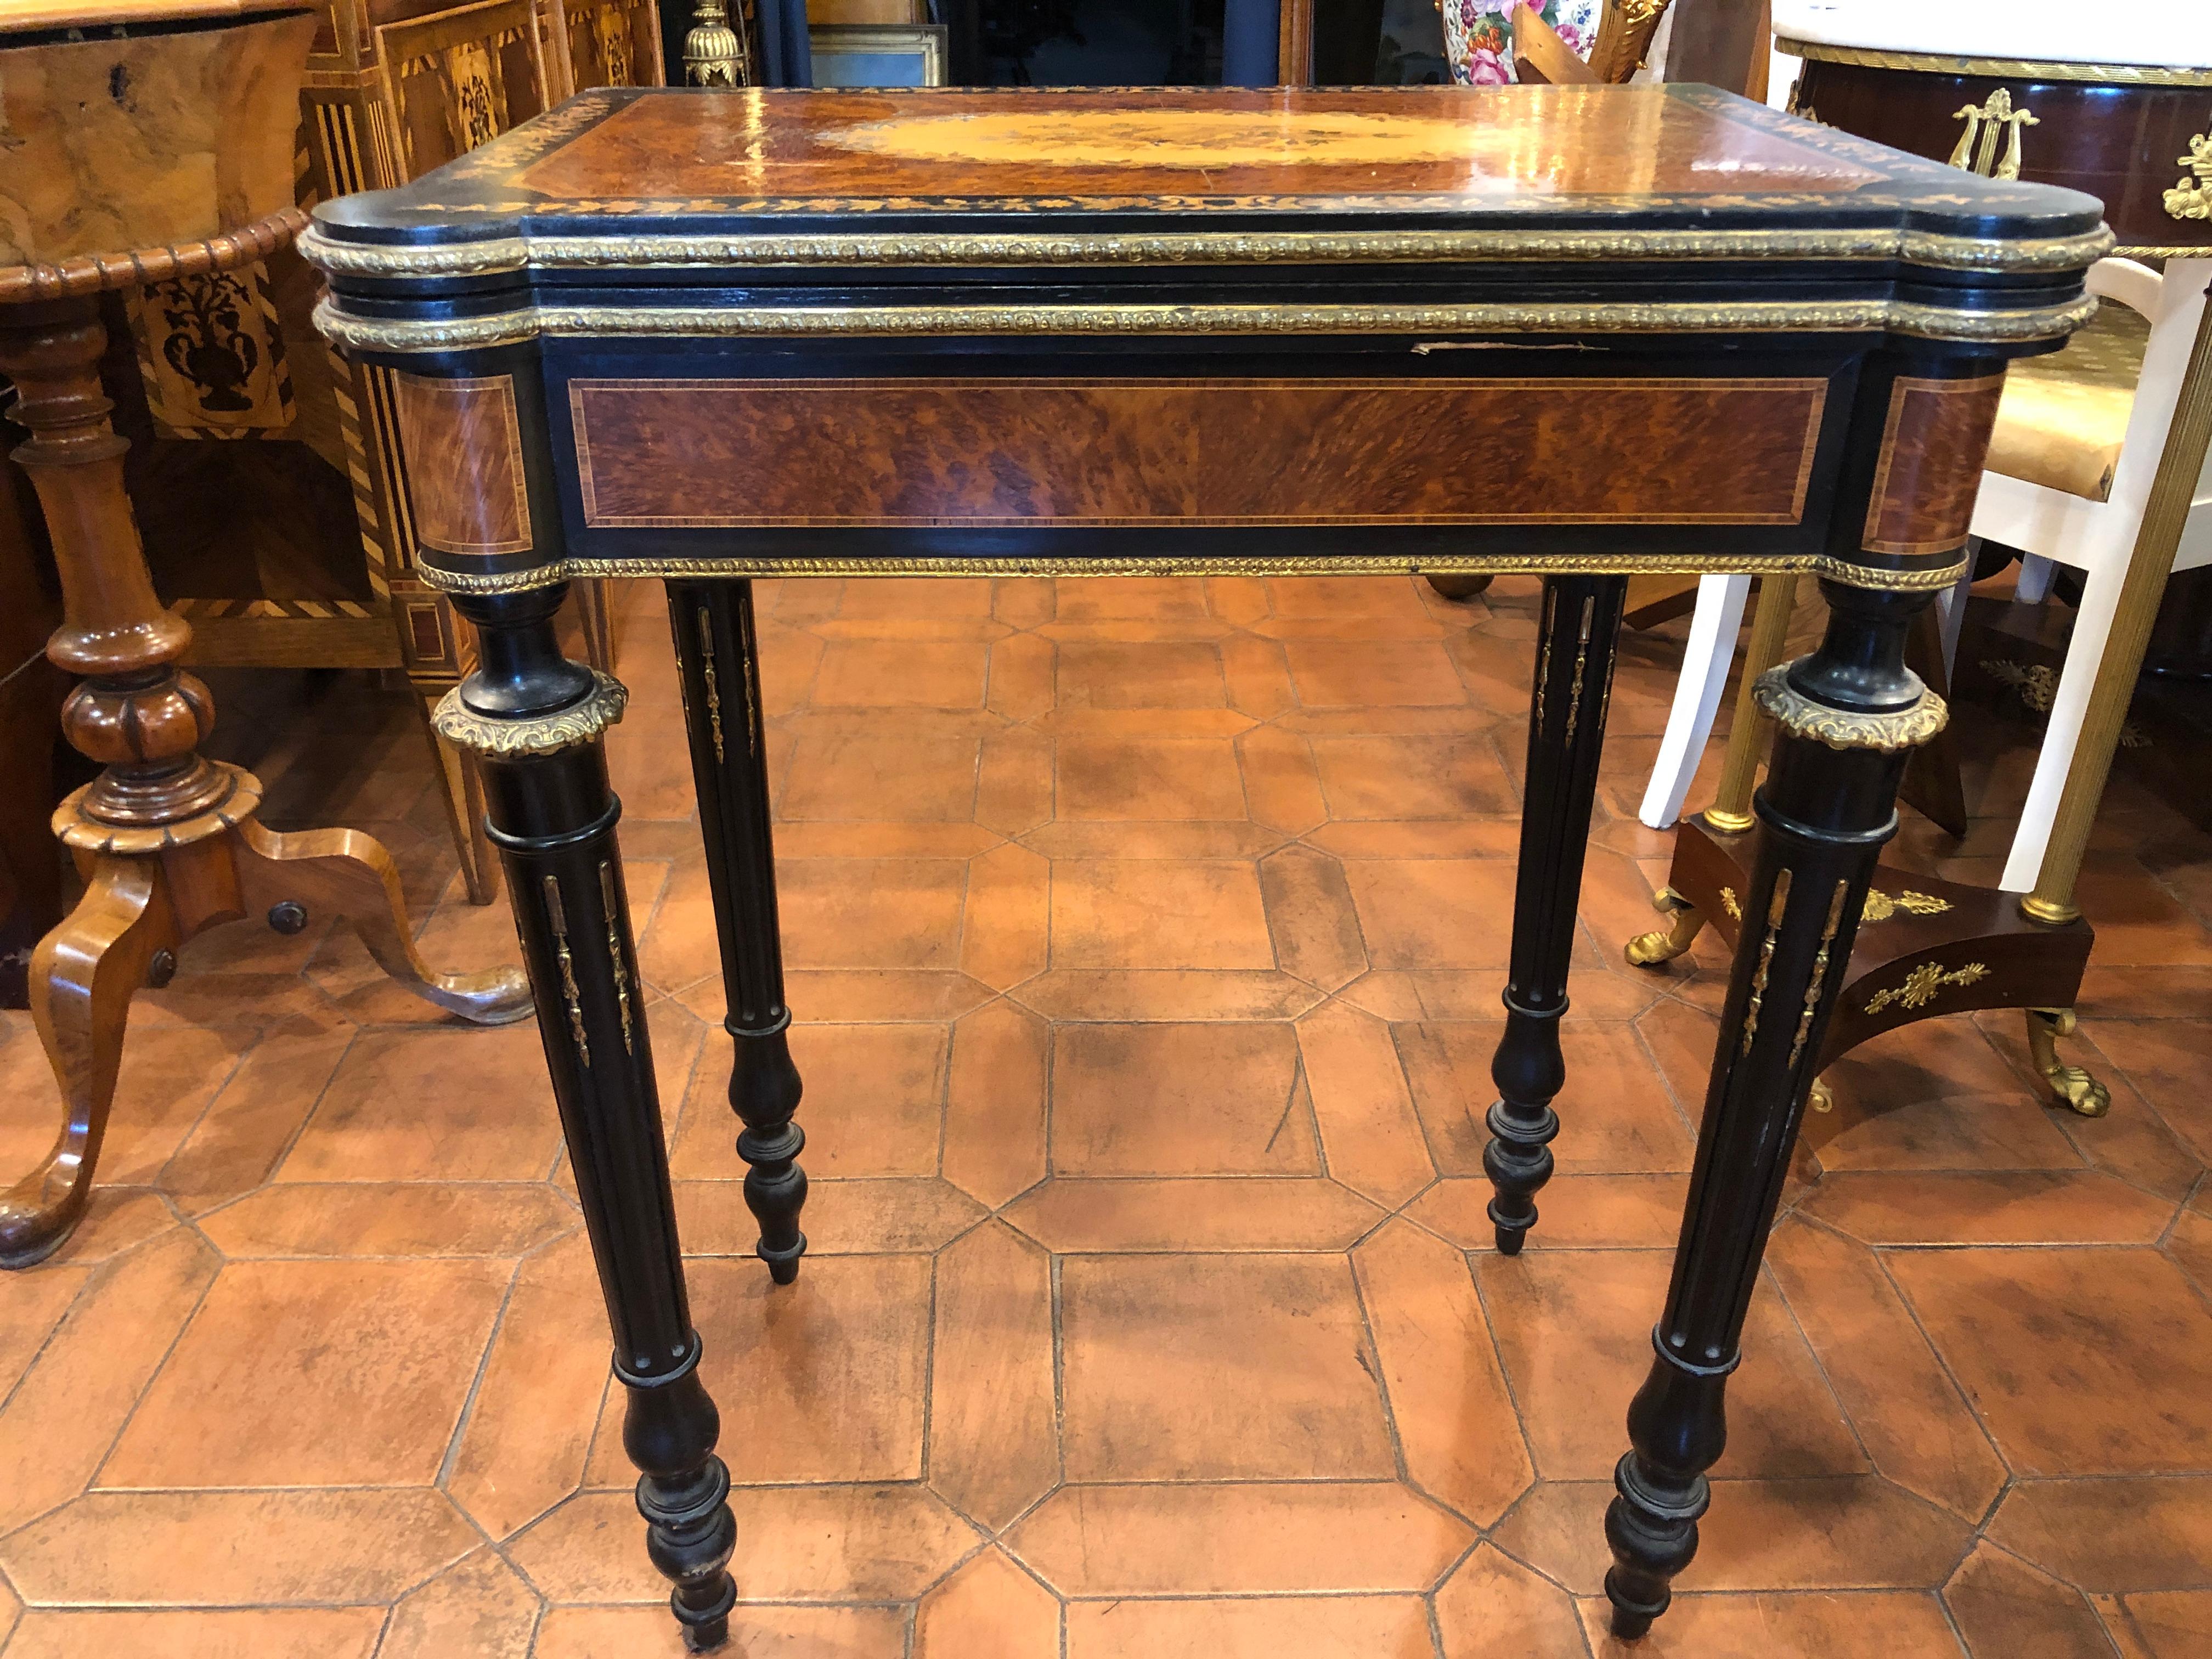 French game table in Thuja briar ebonized wooden parts, bird's eye maple and kingwood interior. Marquetry in fruitwood. Applications engraved in gilded bronze.
We issue a “Certificate of Authenticity”.